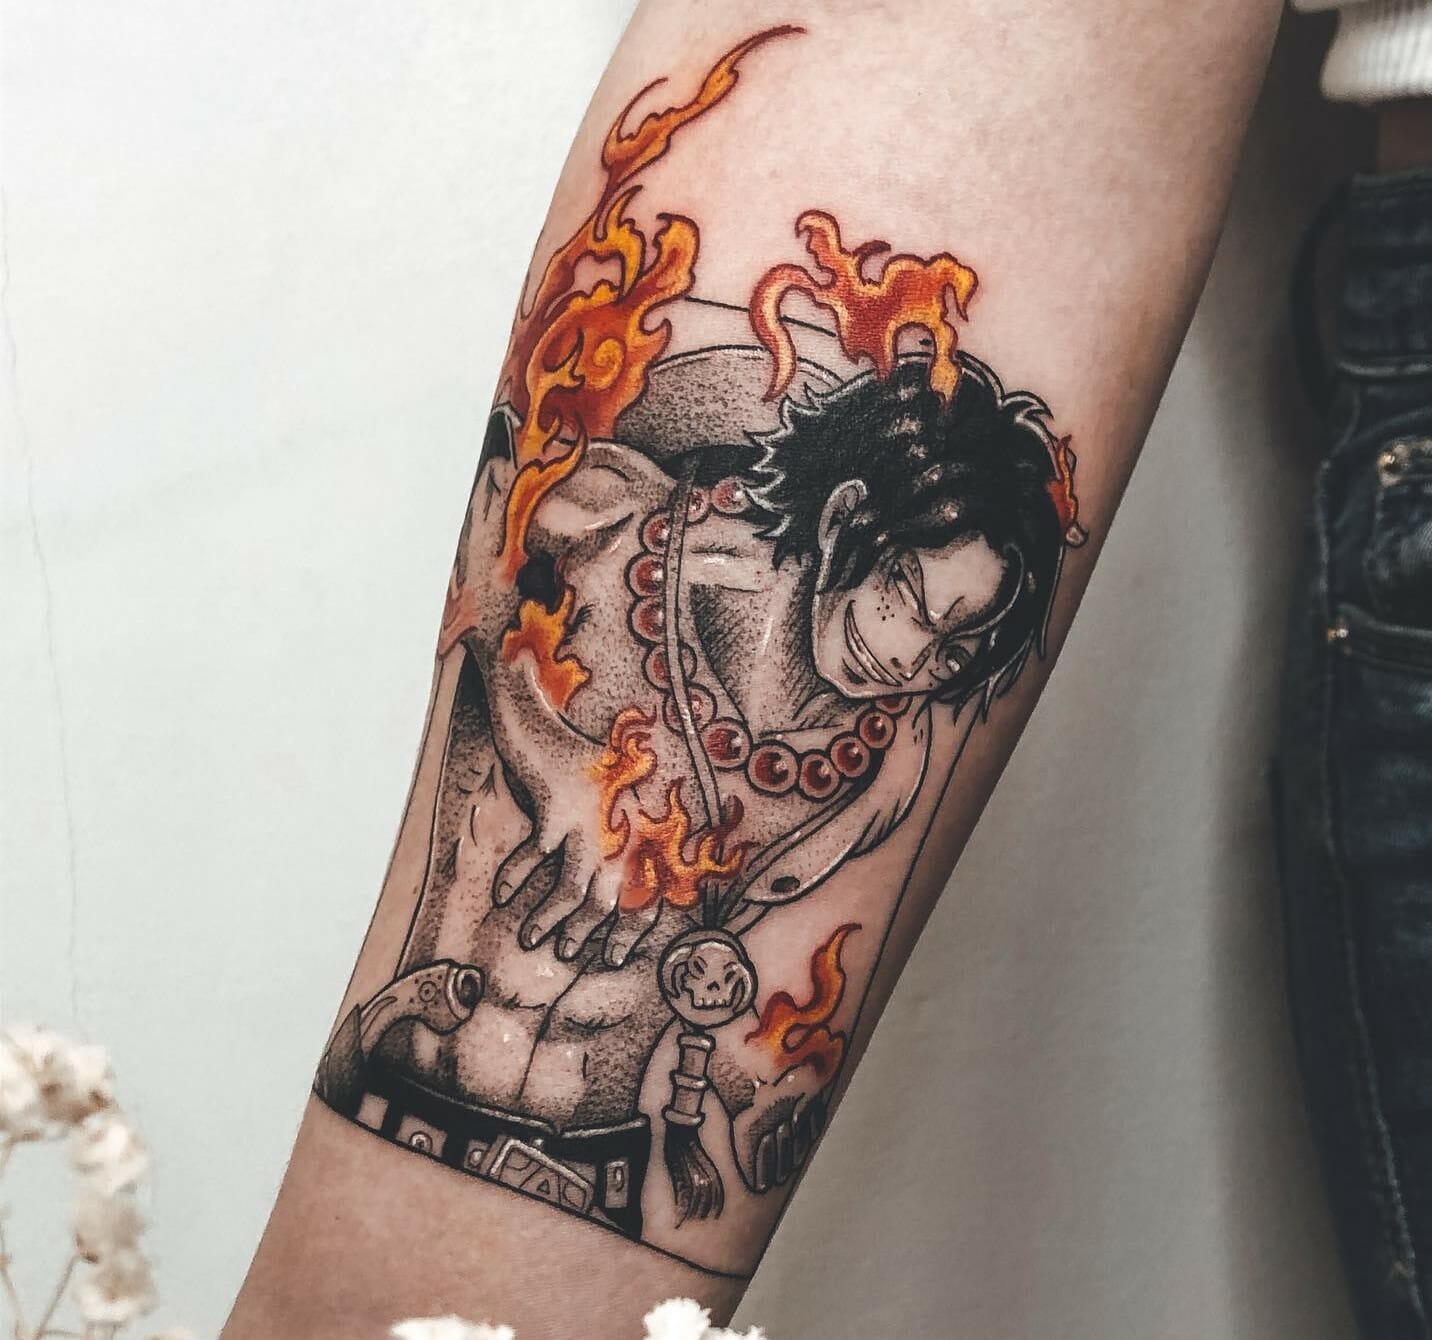 11+ Ace Tattoo One Piece Ideas That Will Blow Your Mind! - alexie